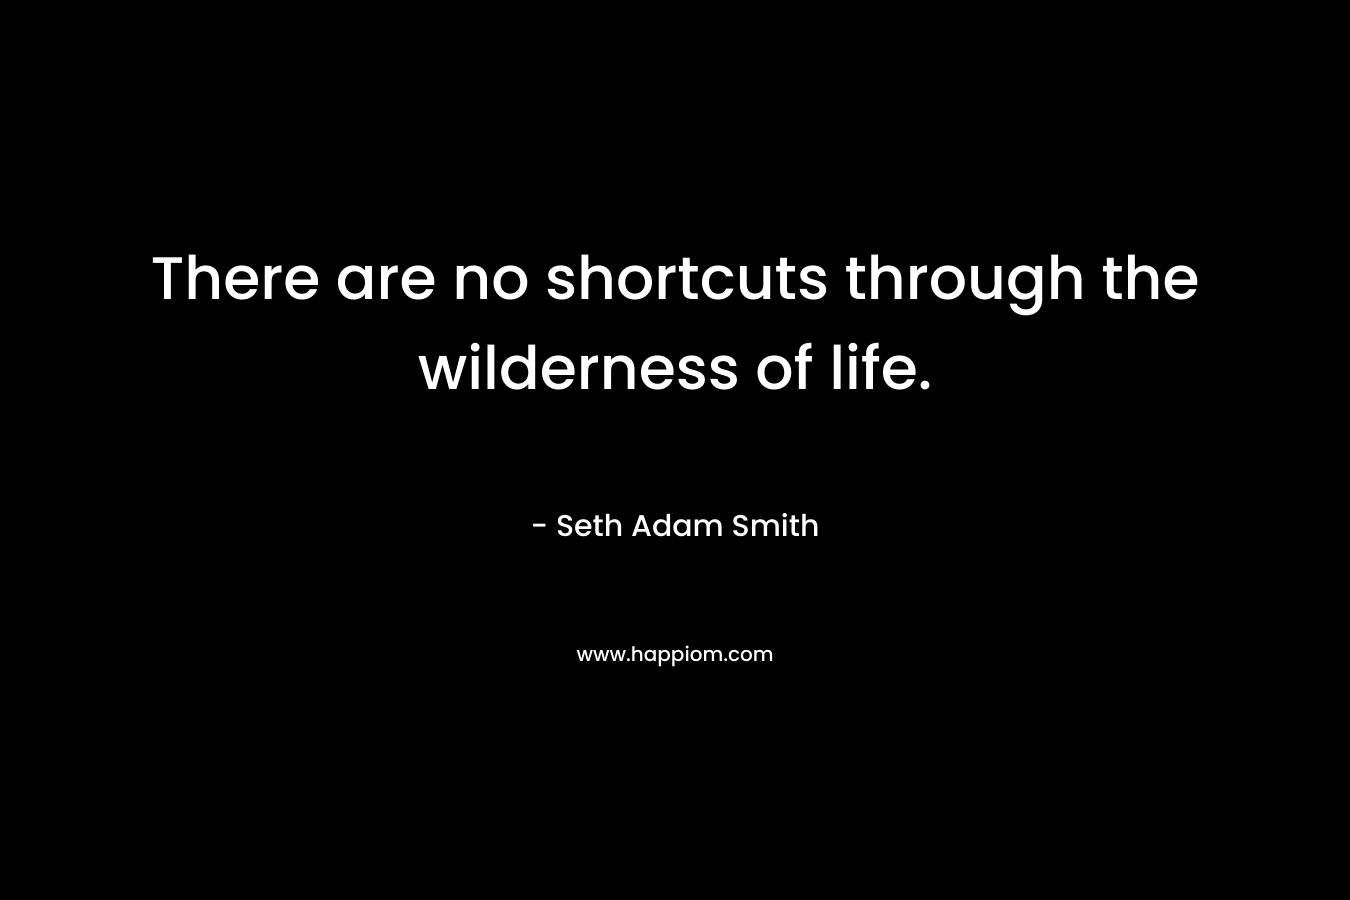 There are no shortcuts through the wilderness of life. – Seth Adam Smith